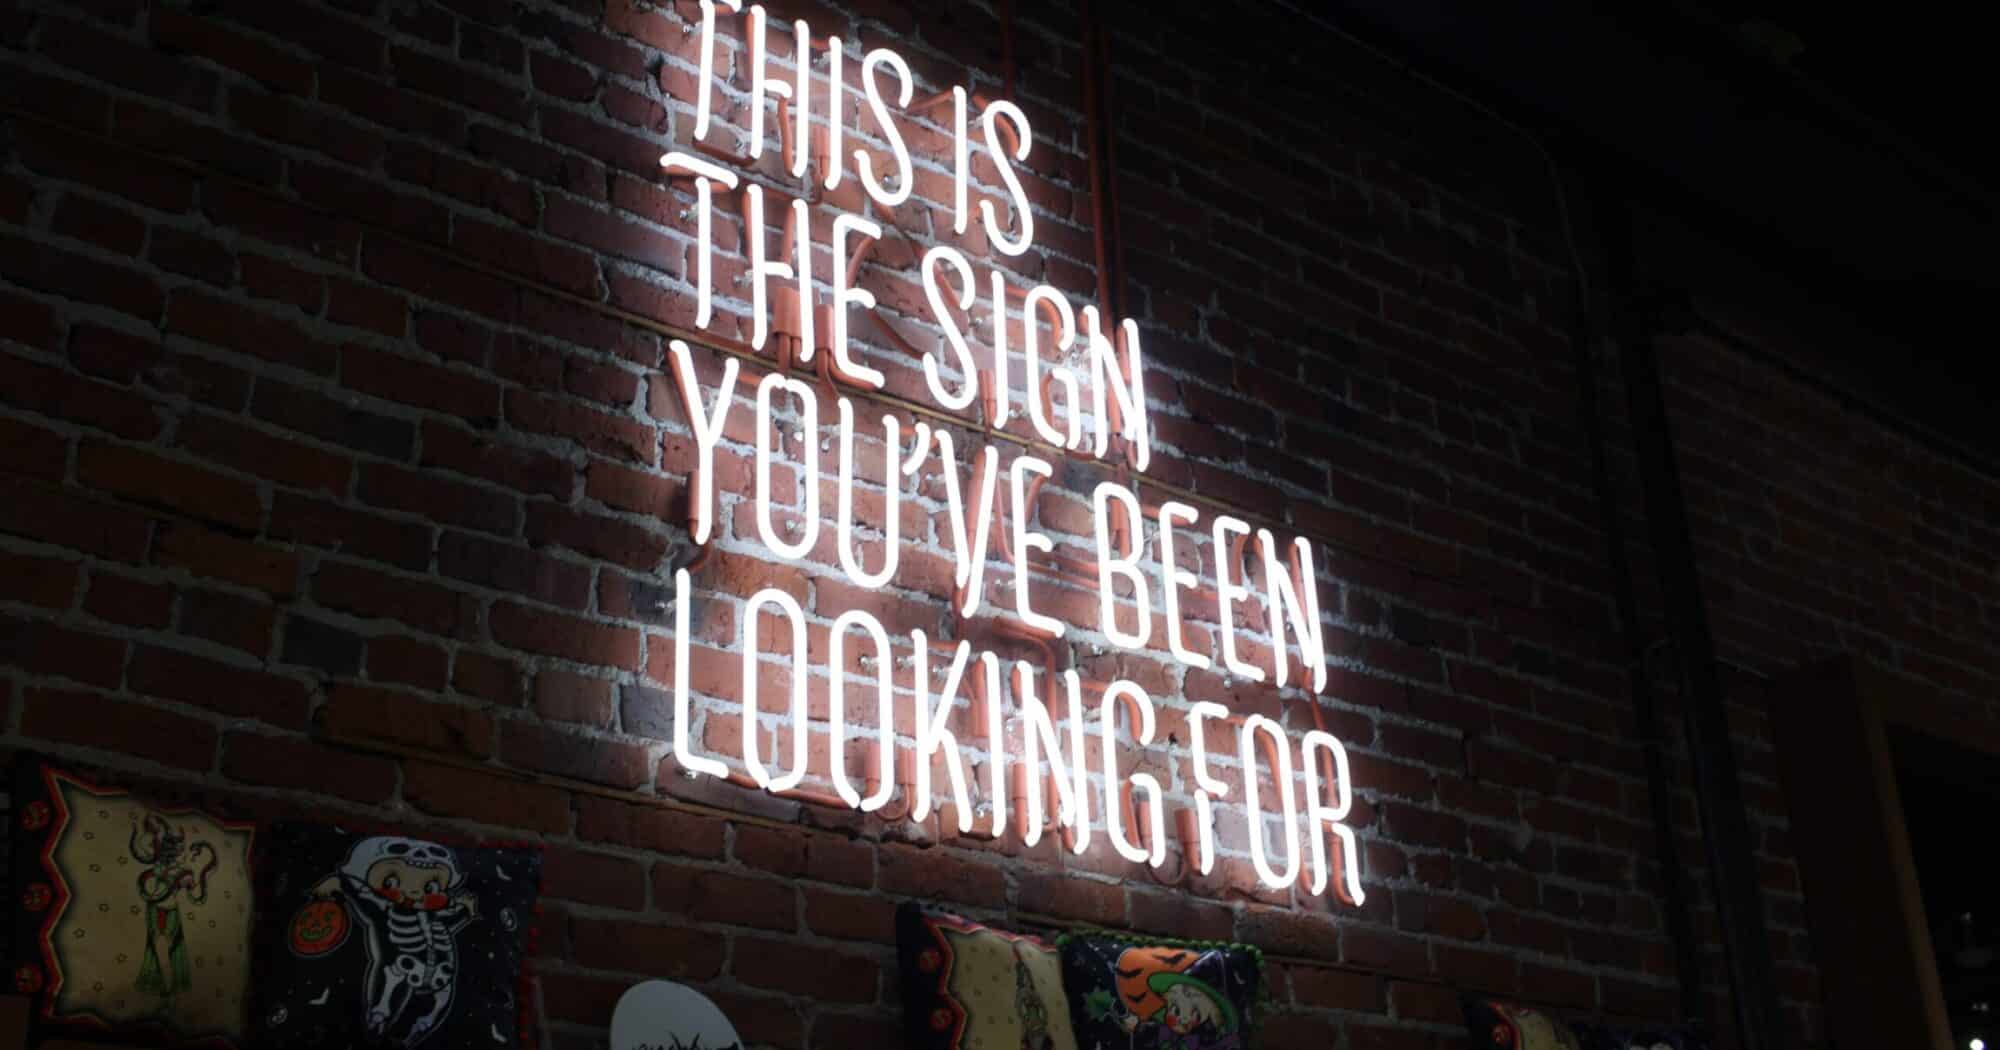 A neon sign that reads "This is the sign you've been looking for."